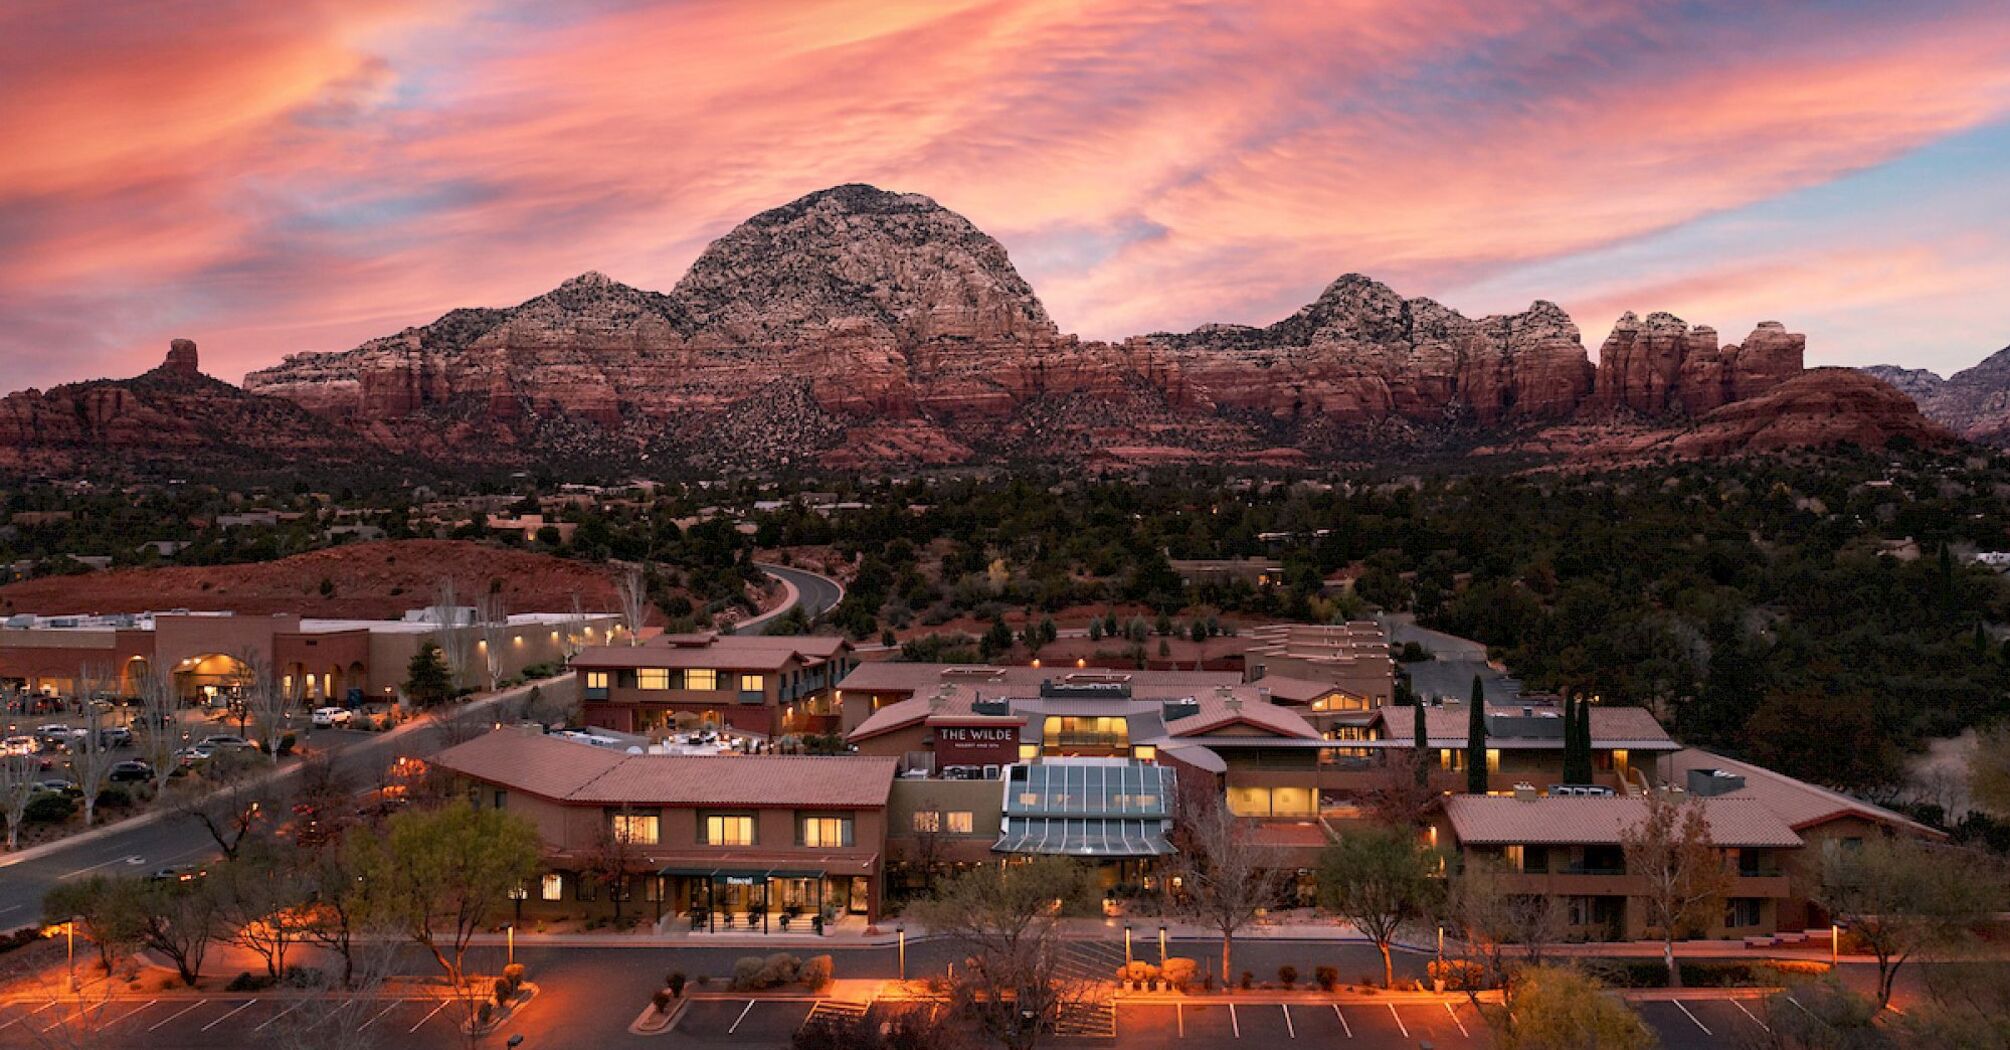 The Wilde Resort and Spa is a beautiful resort in Sedona with an impressive spa and an intense experience